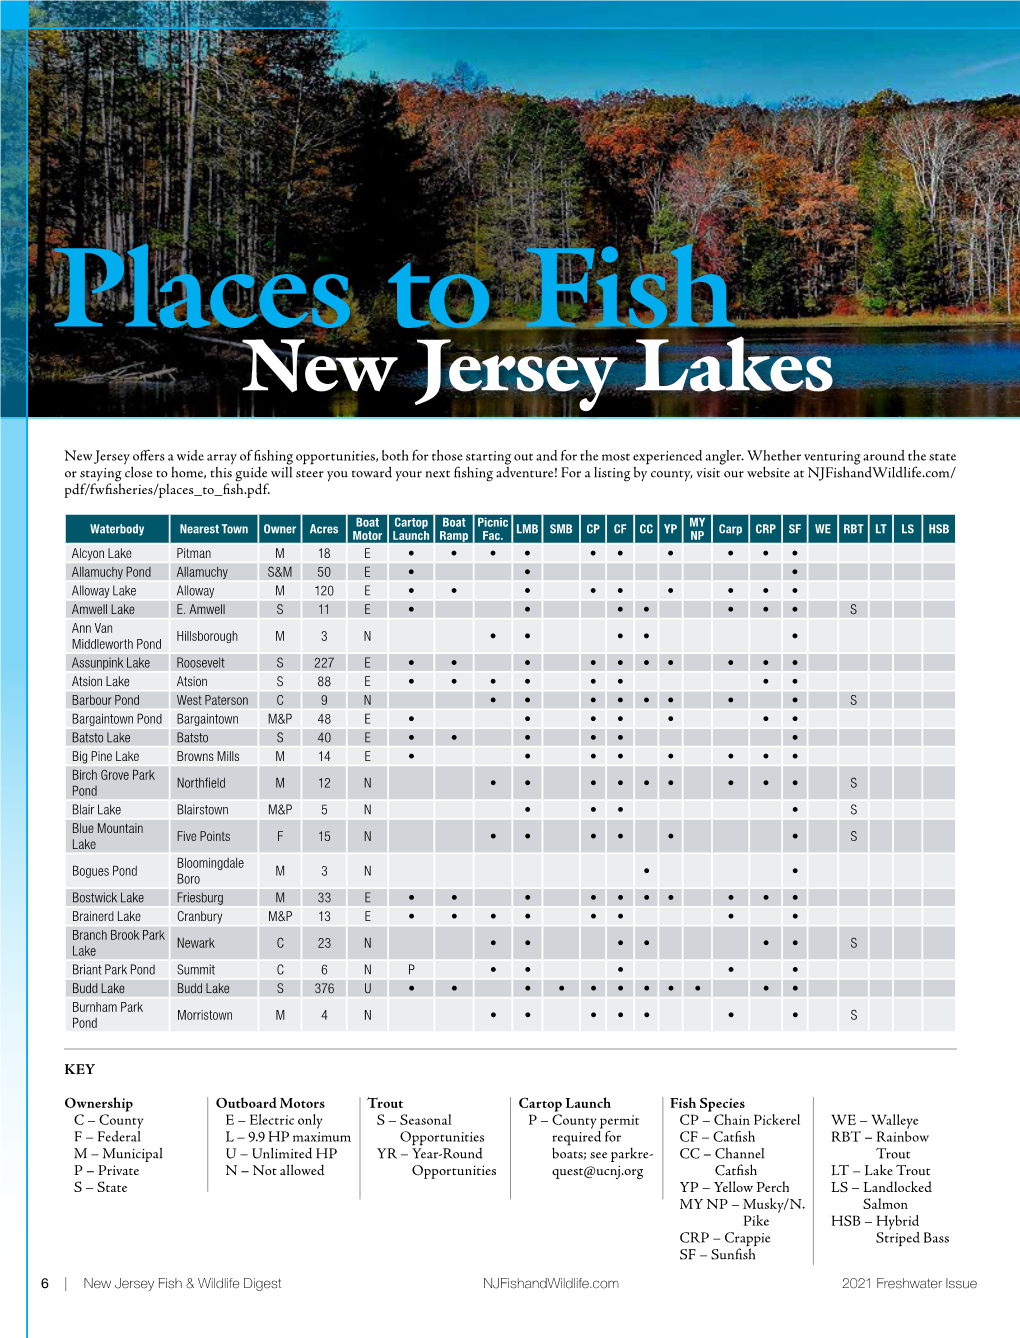 2021 Freshwater Fishing Digest Pages 6-15